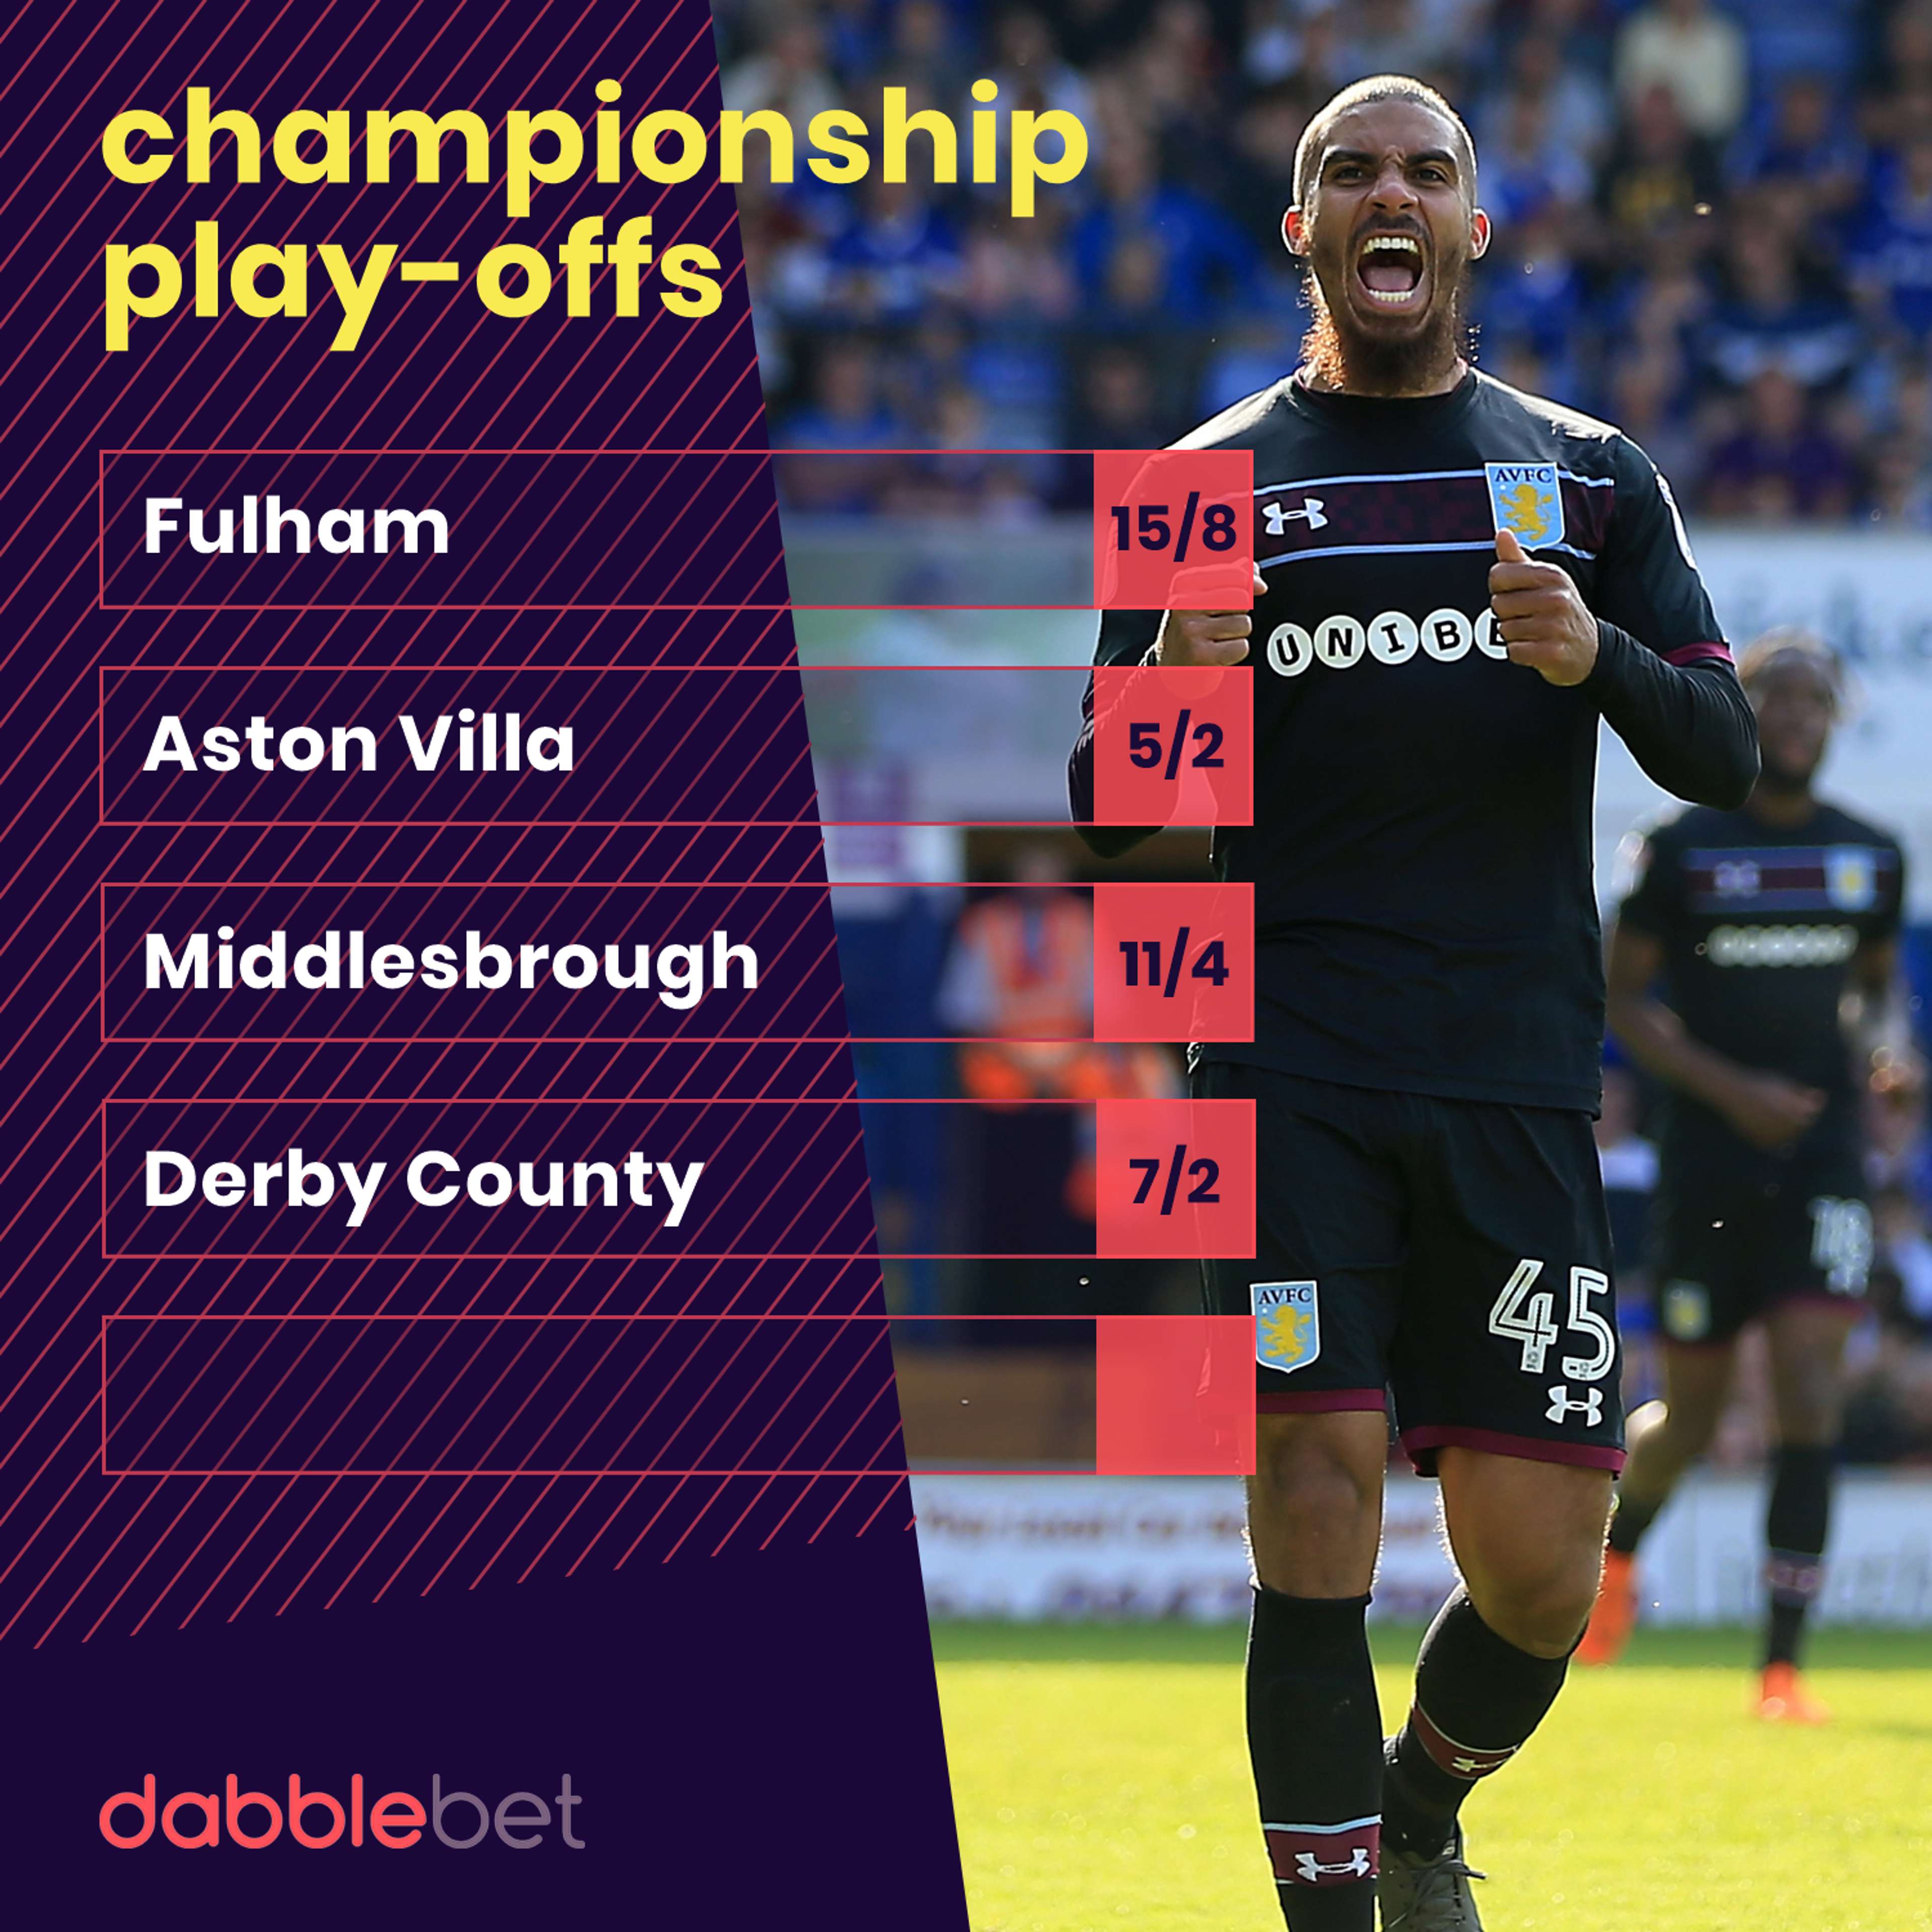 Championship play off odds from dabblebet